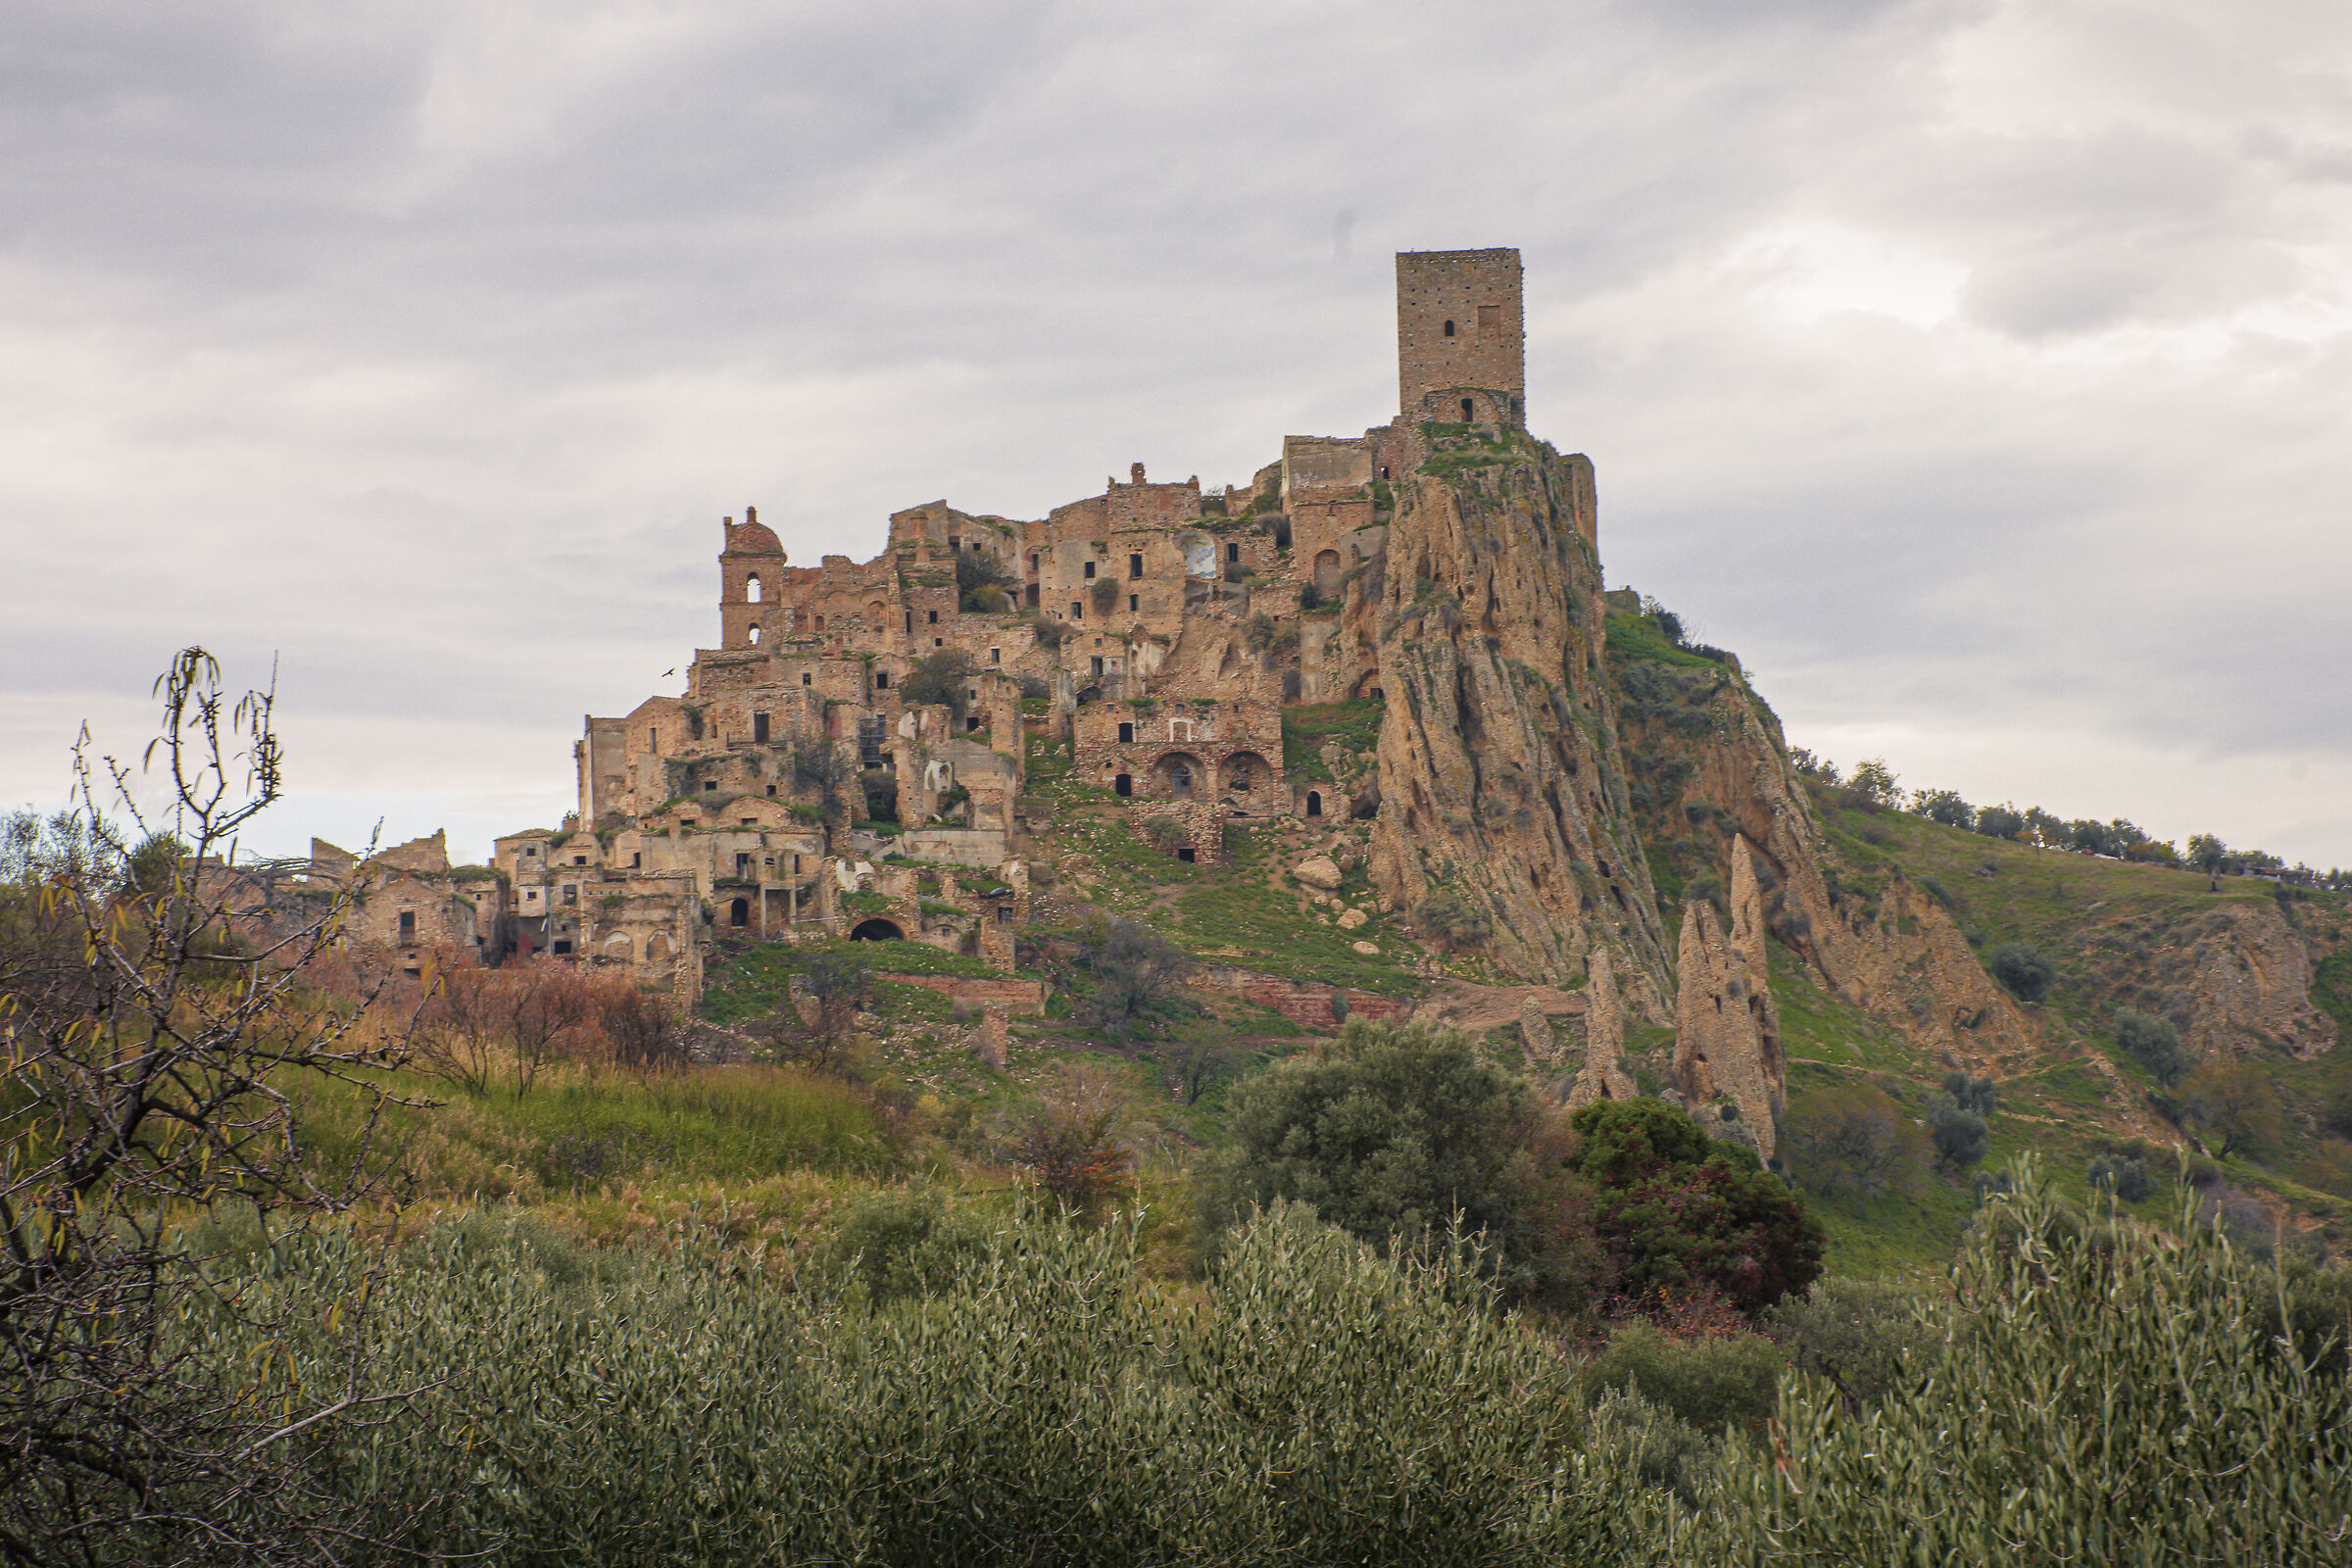 Craco "the ghost town"...